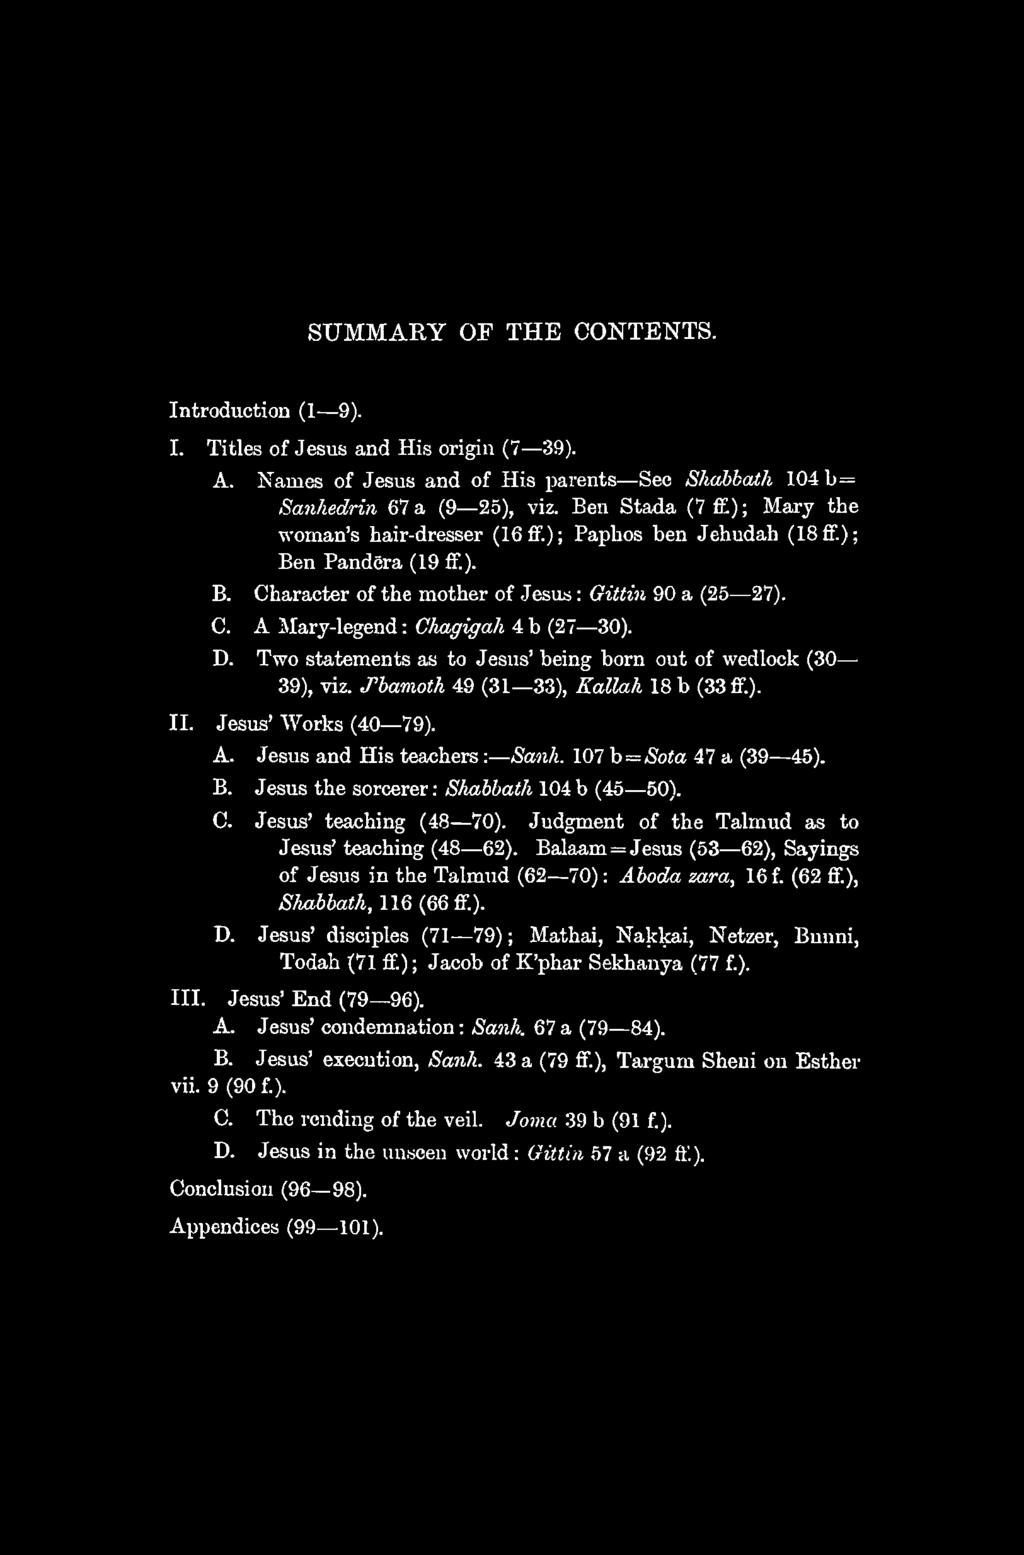 SUMMARY OF THE CONTENTS. Introduction (1 9). I. Titles of Jesus and His origin (7 39). A. Names of Jesus and of His parents See S/mbbath 104 b= San/iedrin 67 a (9 25), viz.